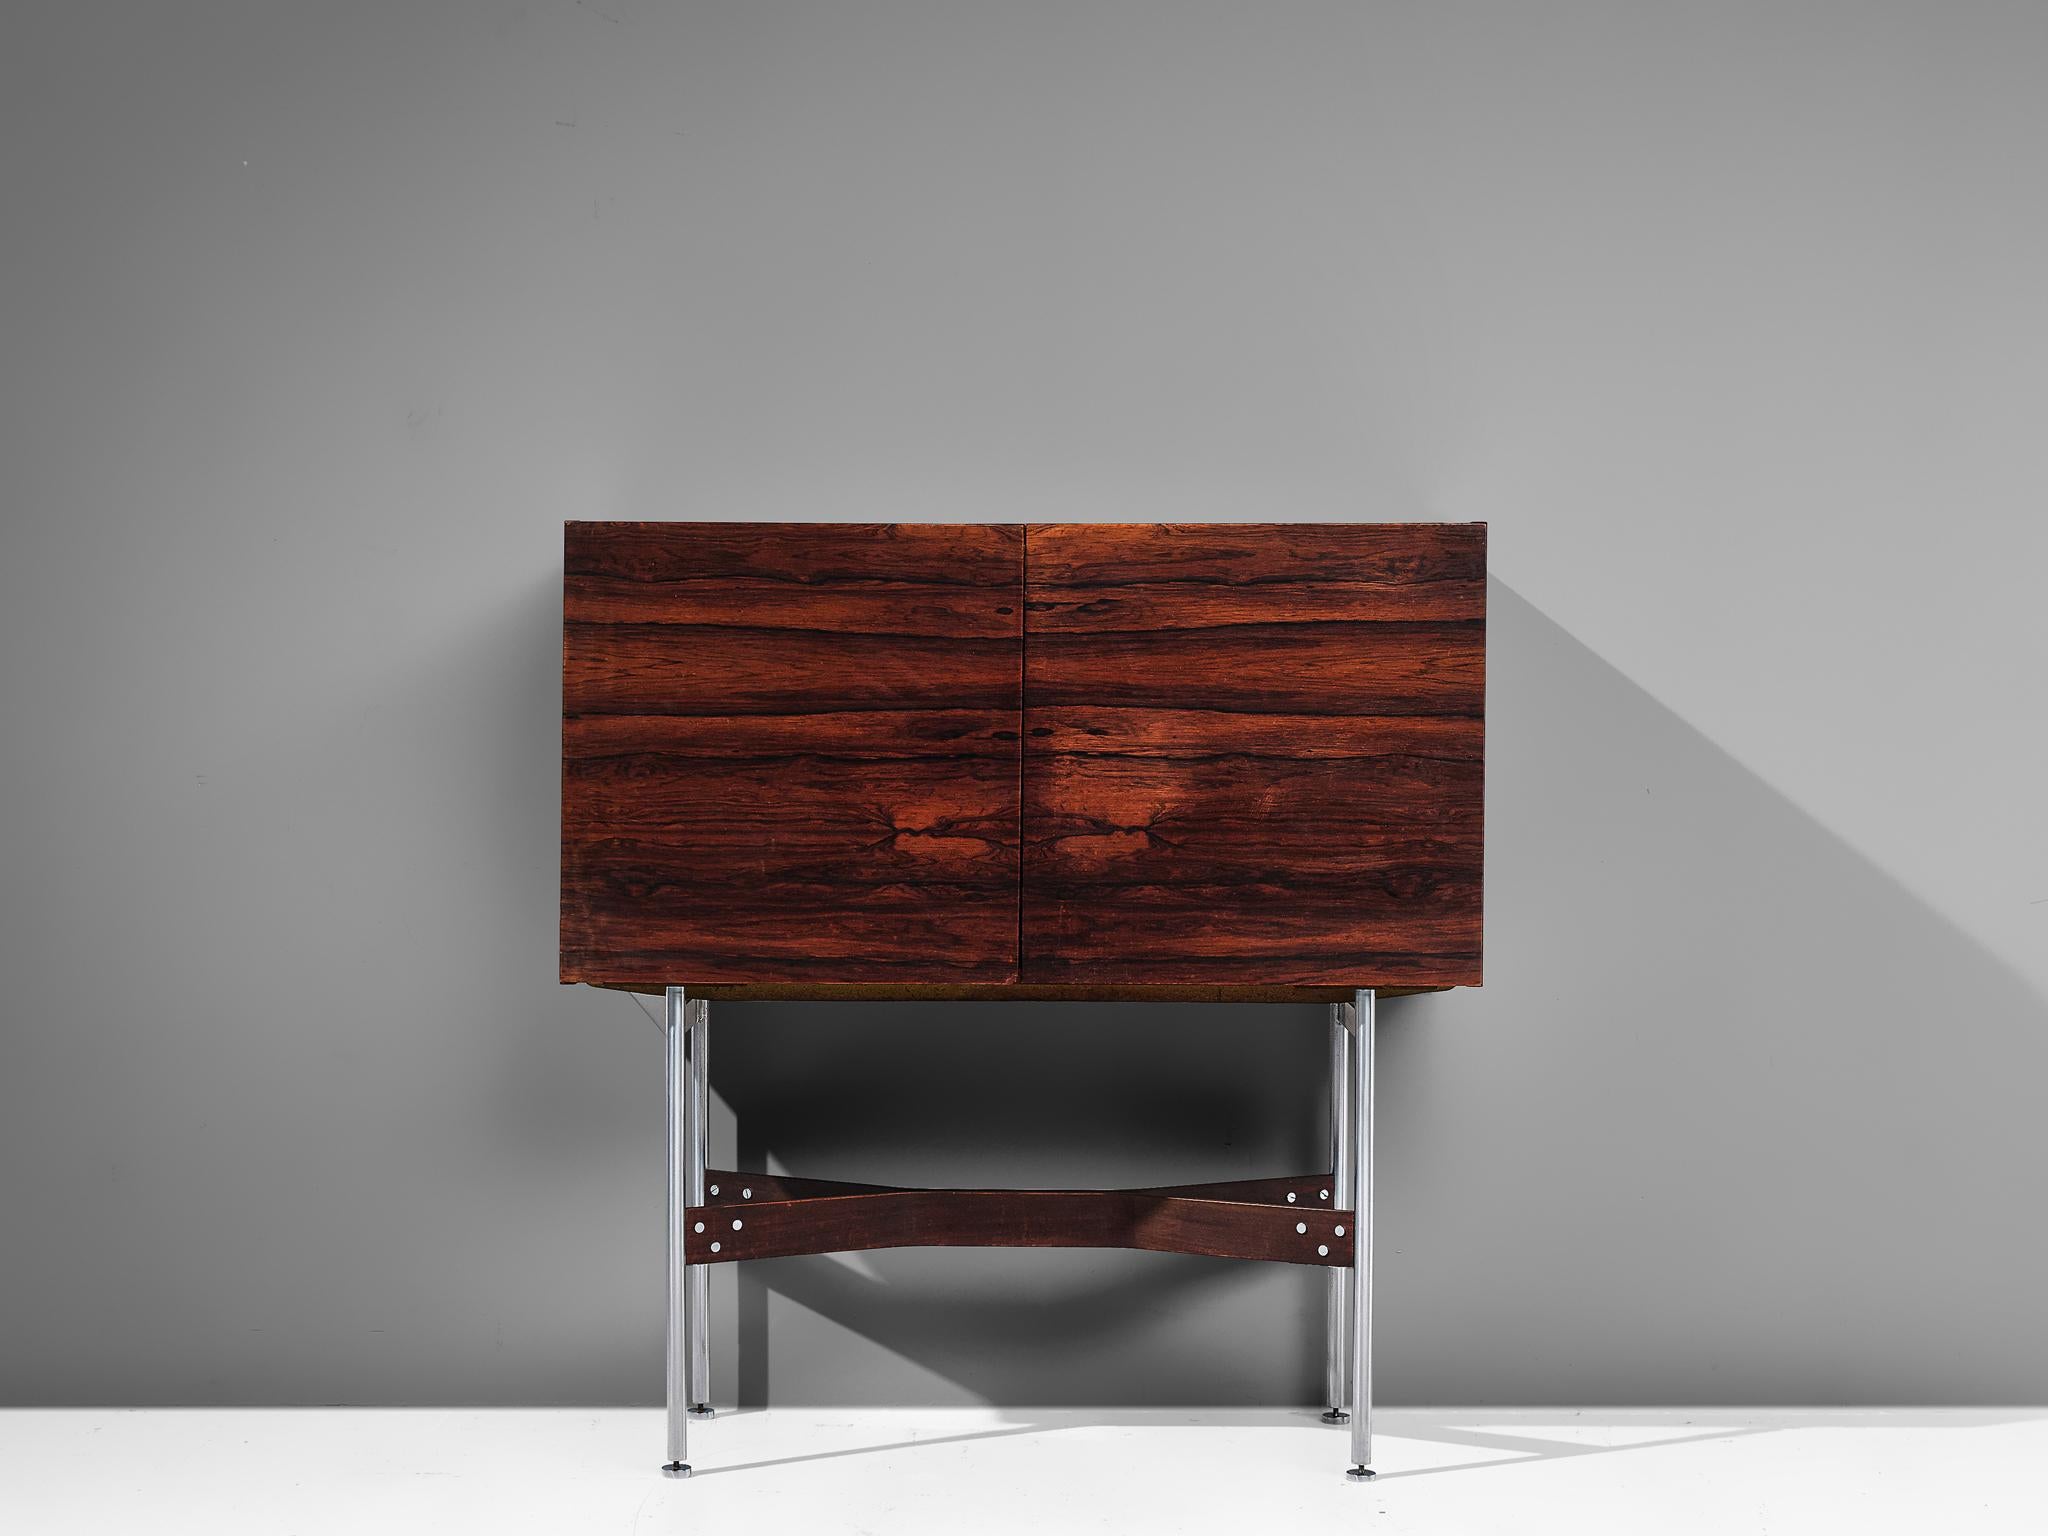 Bar cabinet in rosewood and metal, by Rudolf Bernd Glatzel for Fristho Holland, the Netherlands, 1955.

Well crafted bar cabinet with beautiful proportions. The elegant brushed metal and rosewood base contribute to the floating effect of the two